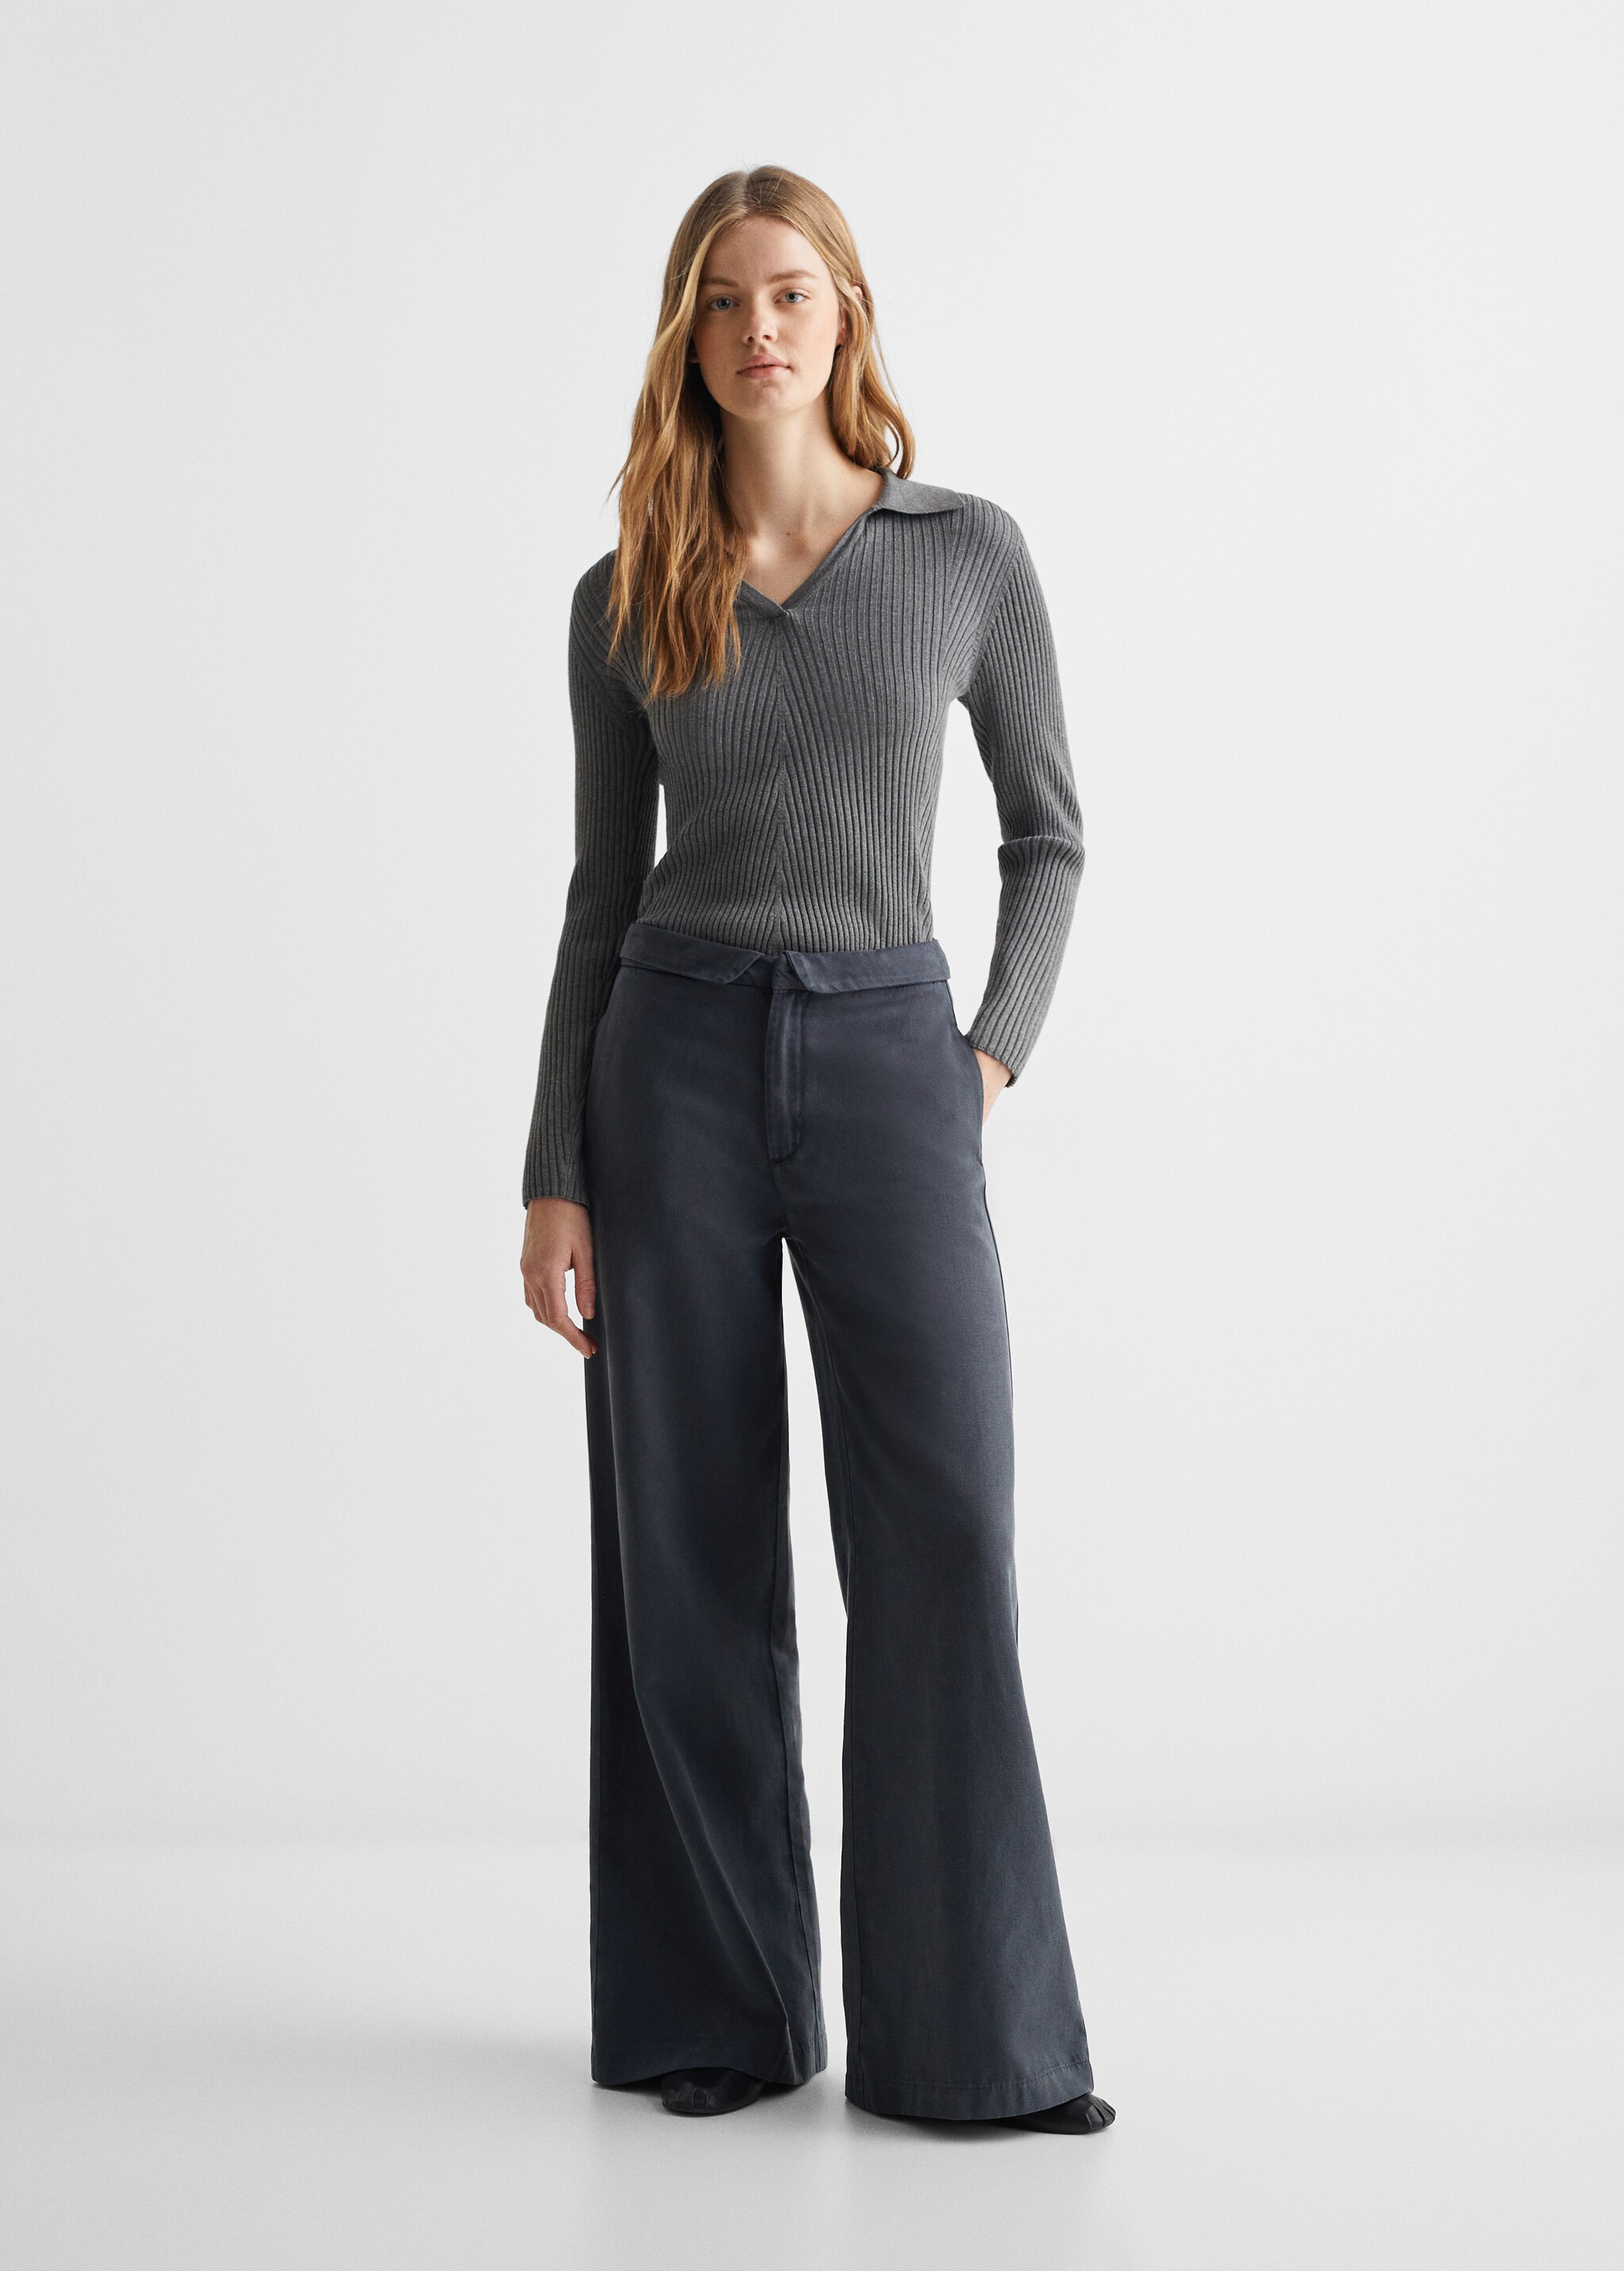 Turn-up waist trousers - General plane